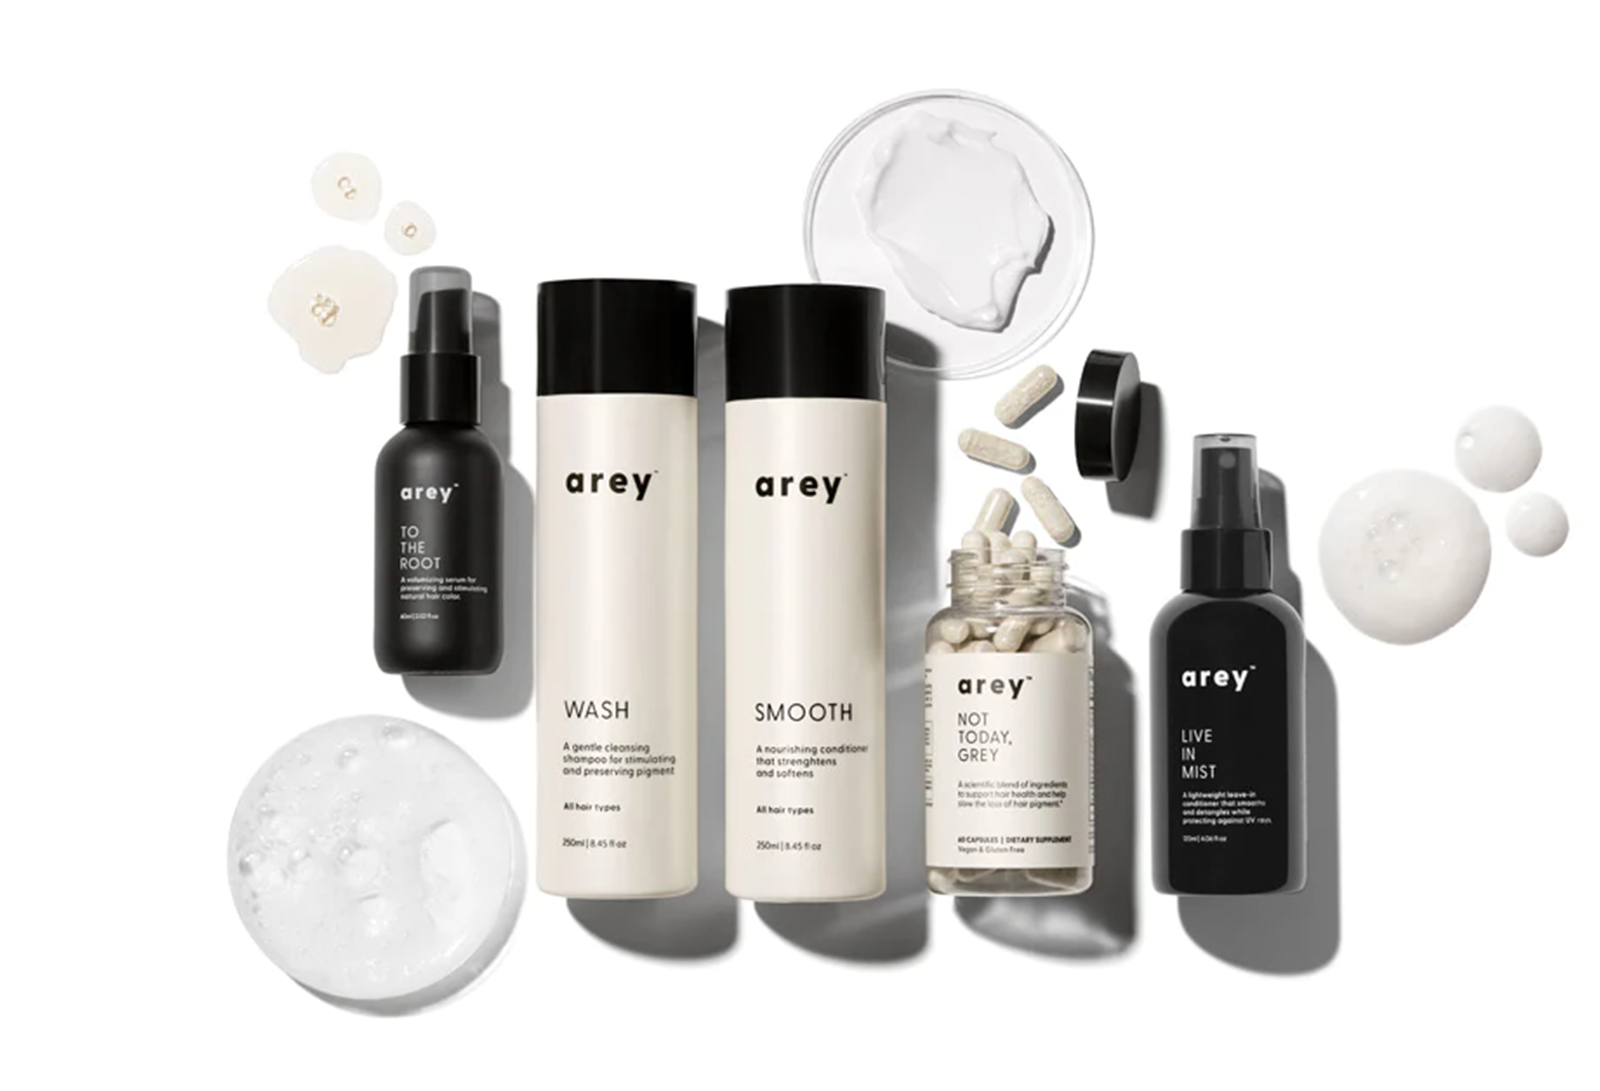 Haircare Start-Up Arey Closes Oversubscribed $4.15 Million Seed Round